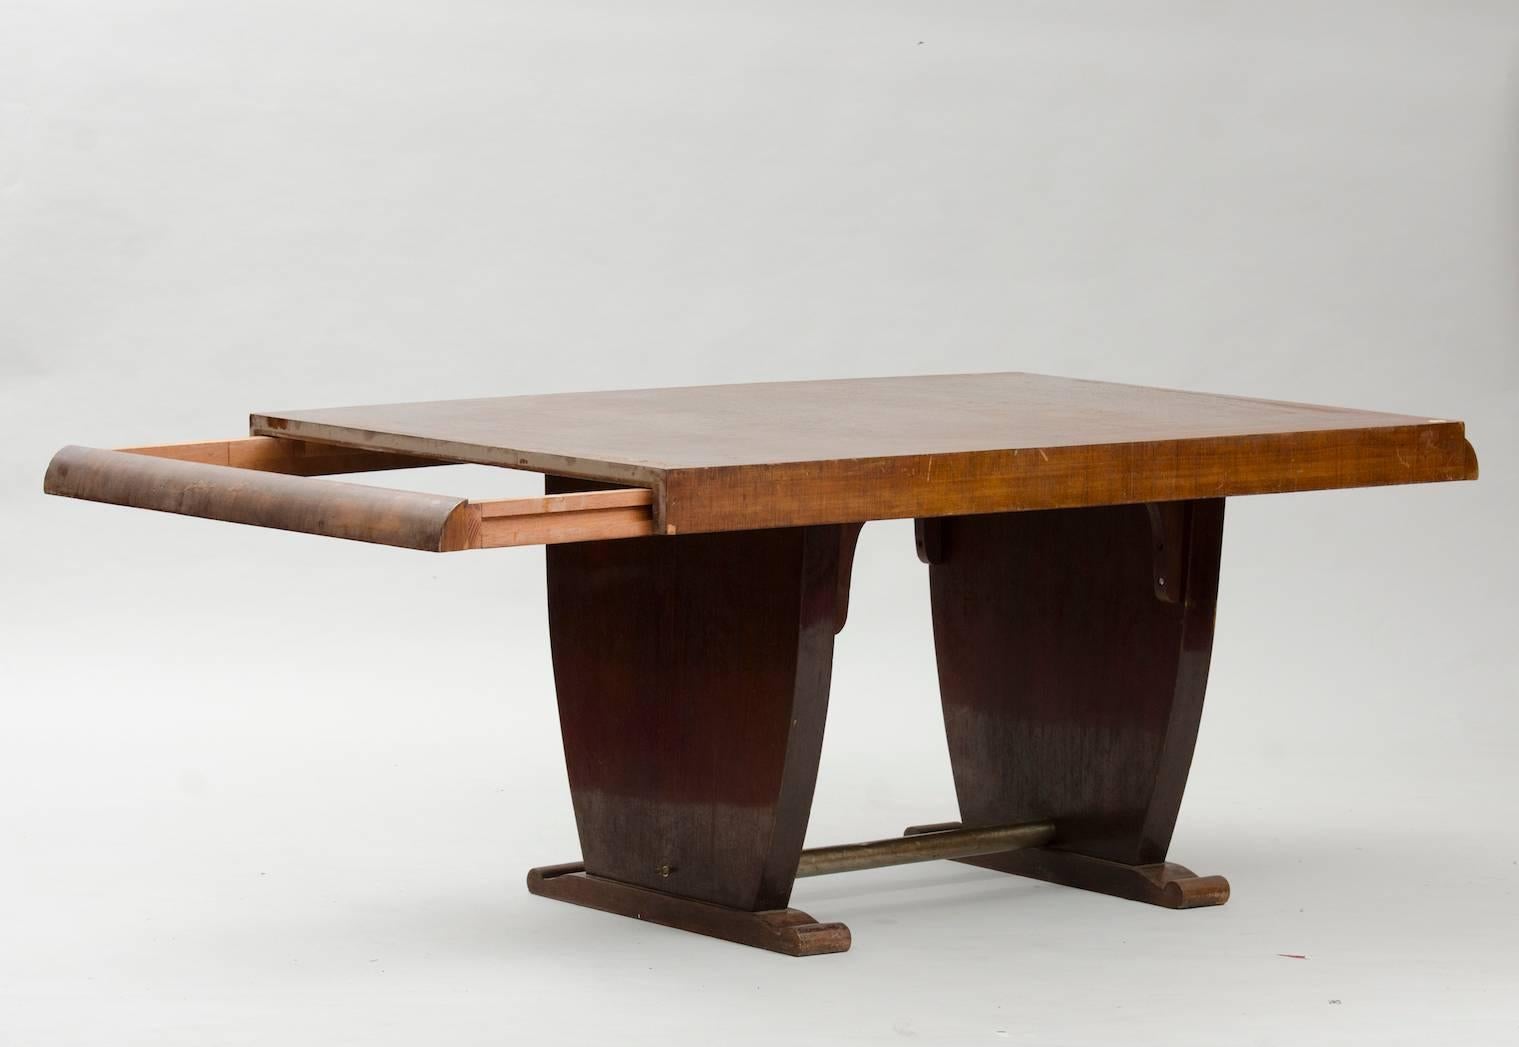 Art Deco walnut extendable dining table, with a chrome tube beam.
Price fully restored: 5500€
Width: 144cm (closed), the extension leaves are not in walnut veneer.
The price shown is in the original condition.
We have our own workshop and we can